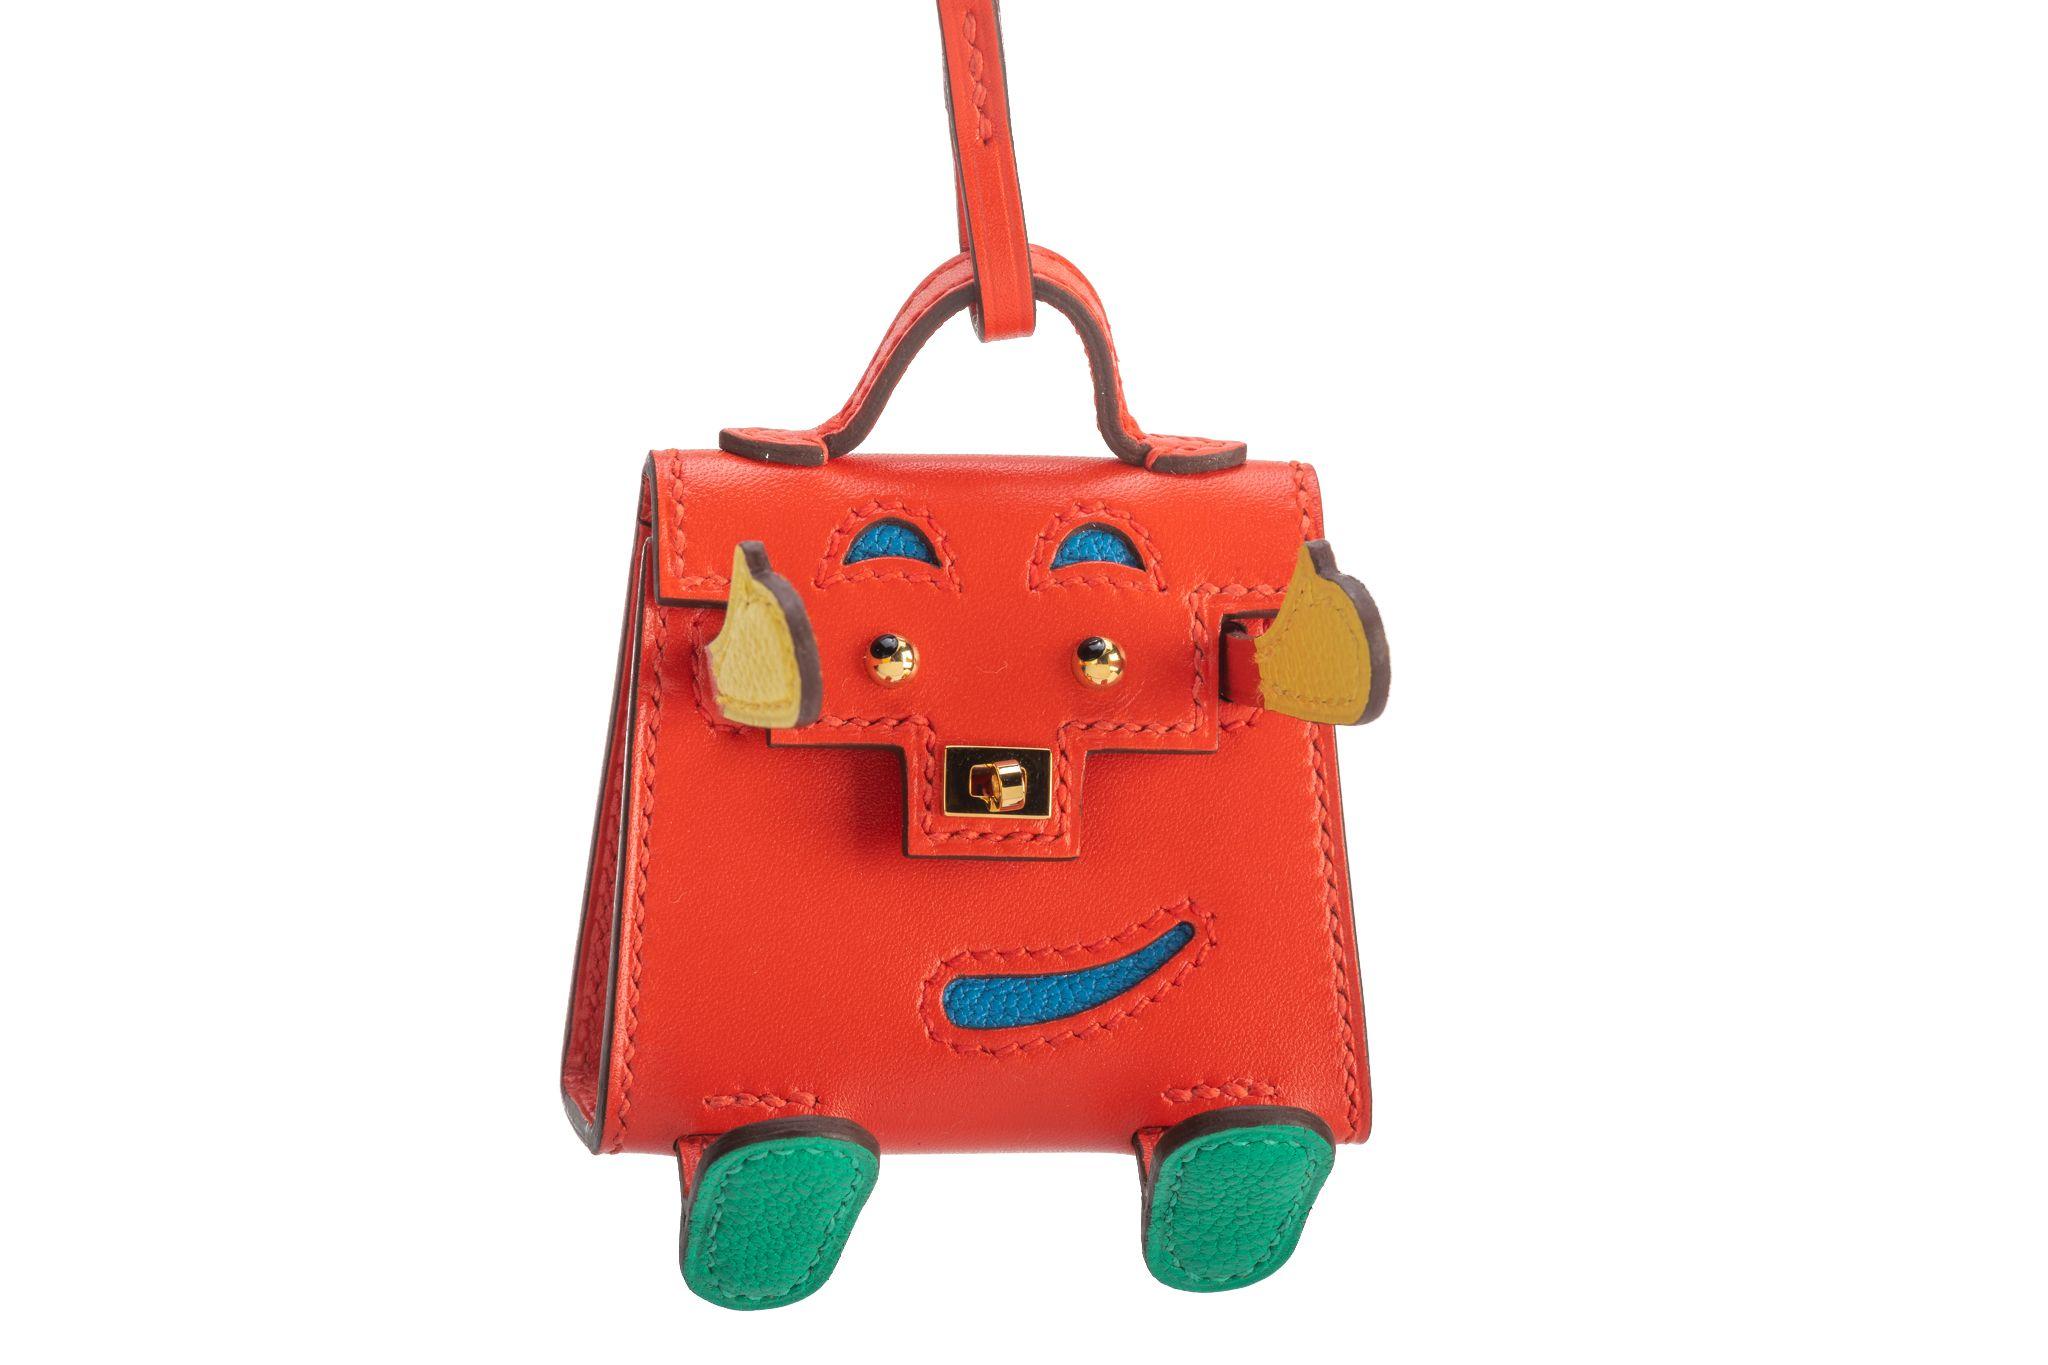 Hermès Quelle Idole Kelly Doll Bag Charm In New Condition For Sale In West Hollywood, CA